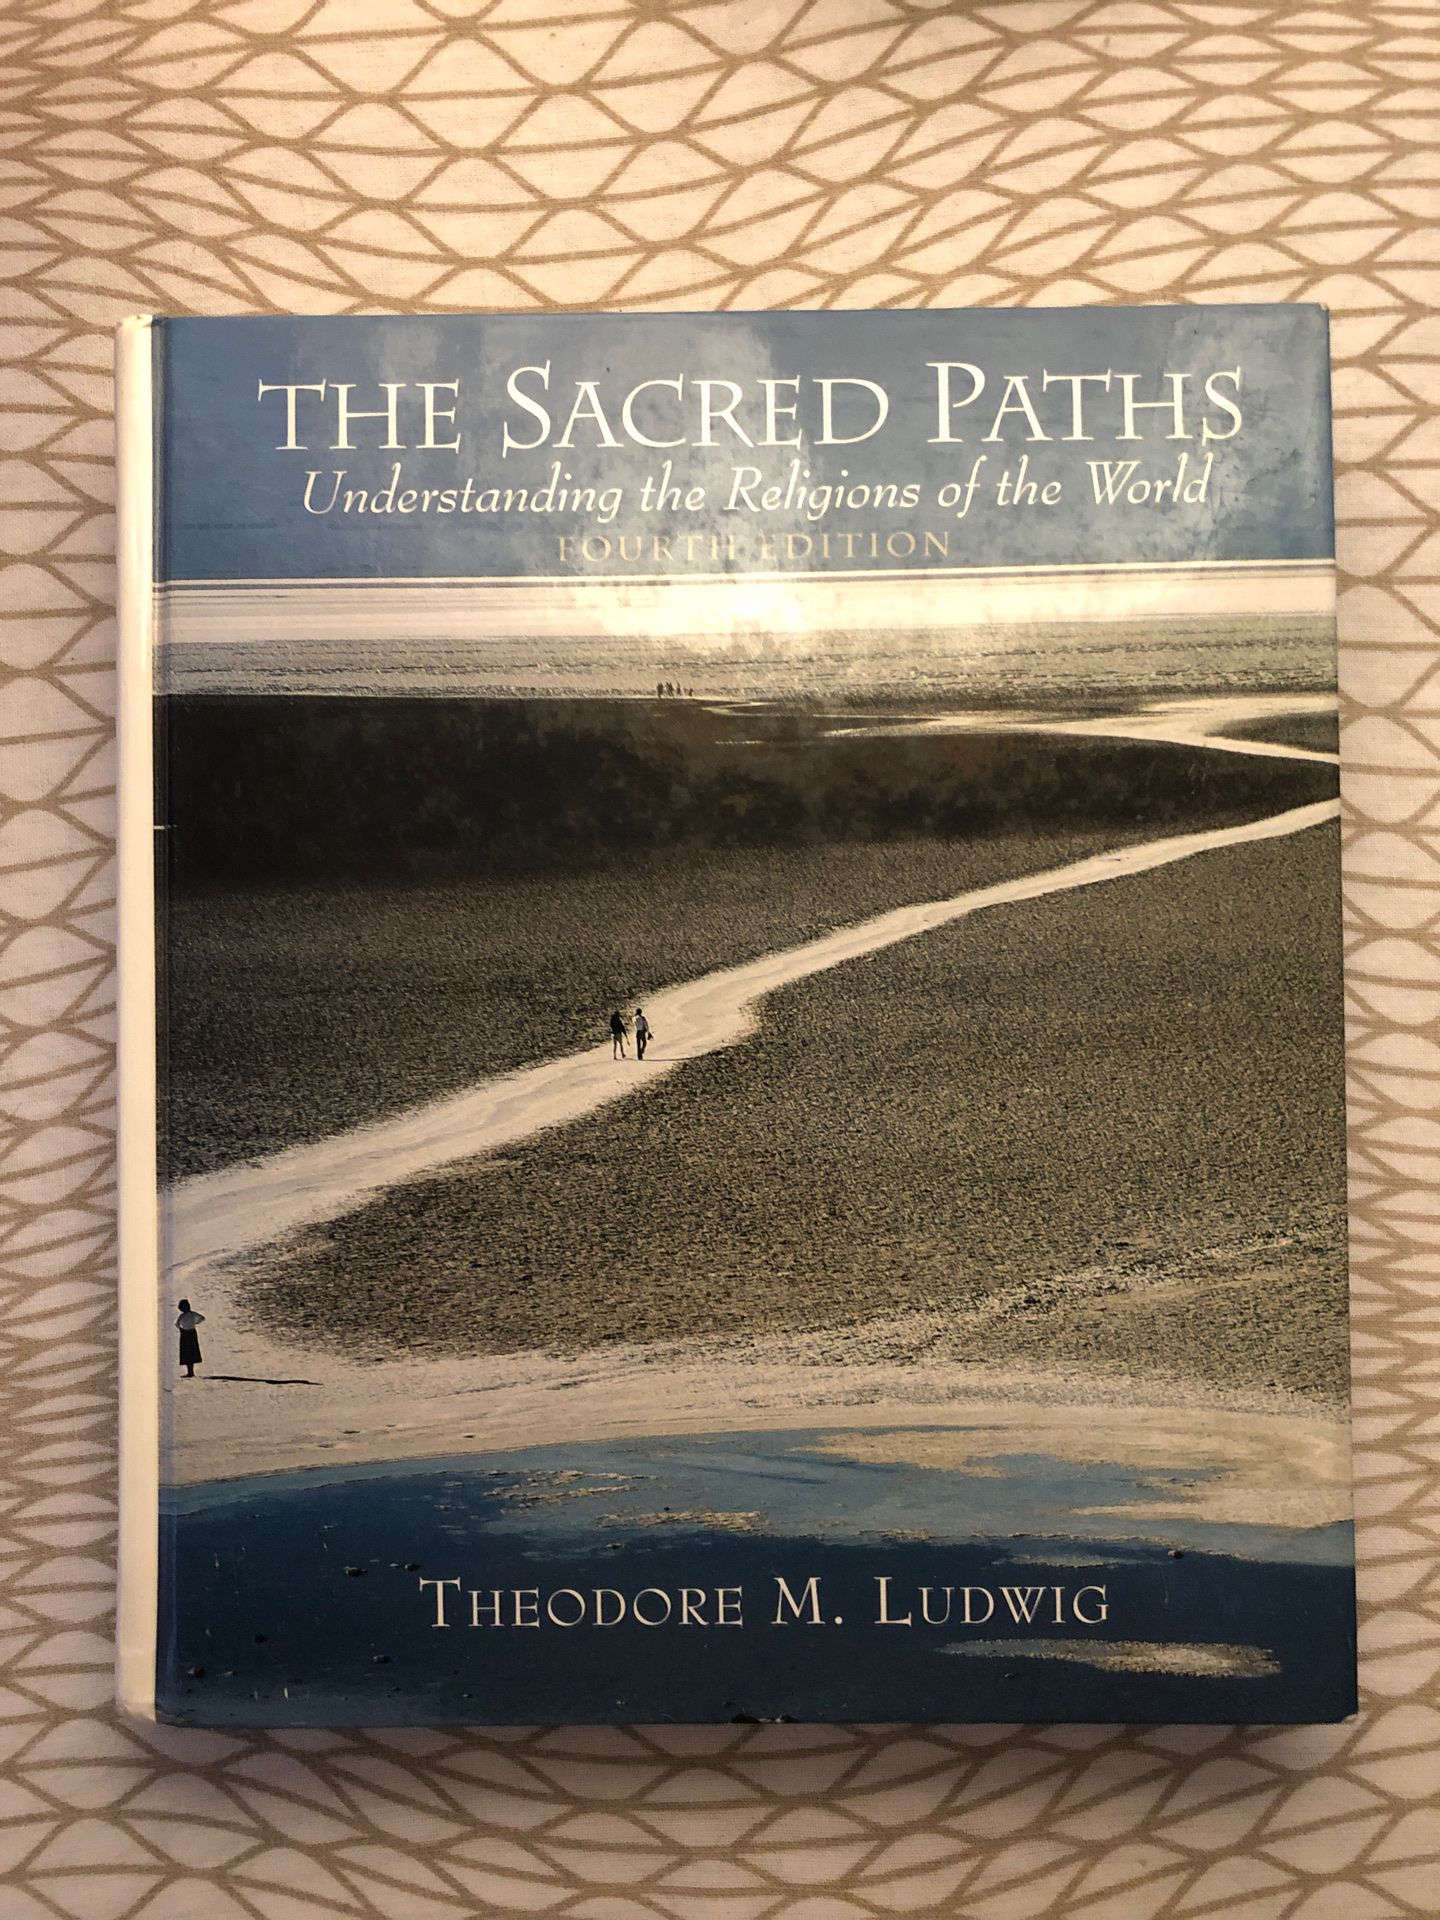 The Sacred Paths: Understanding the Religion of the World by Theodore Ludwig (Fourth Edition)